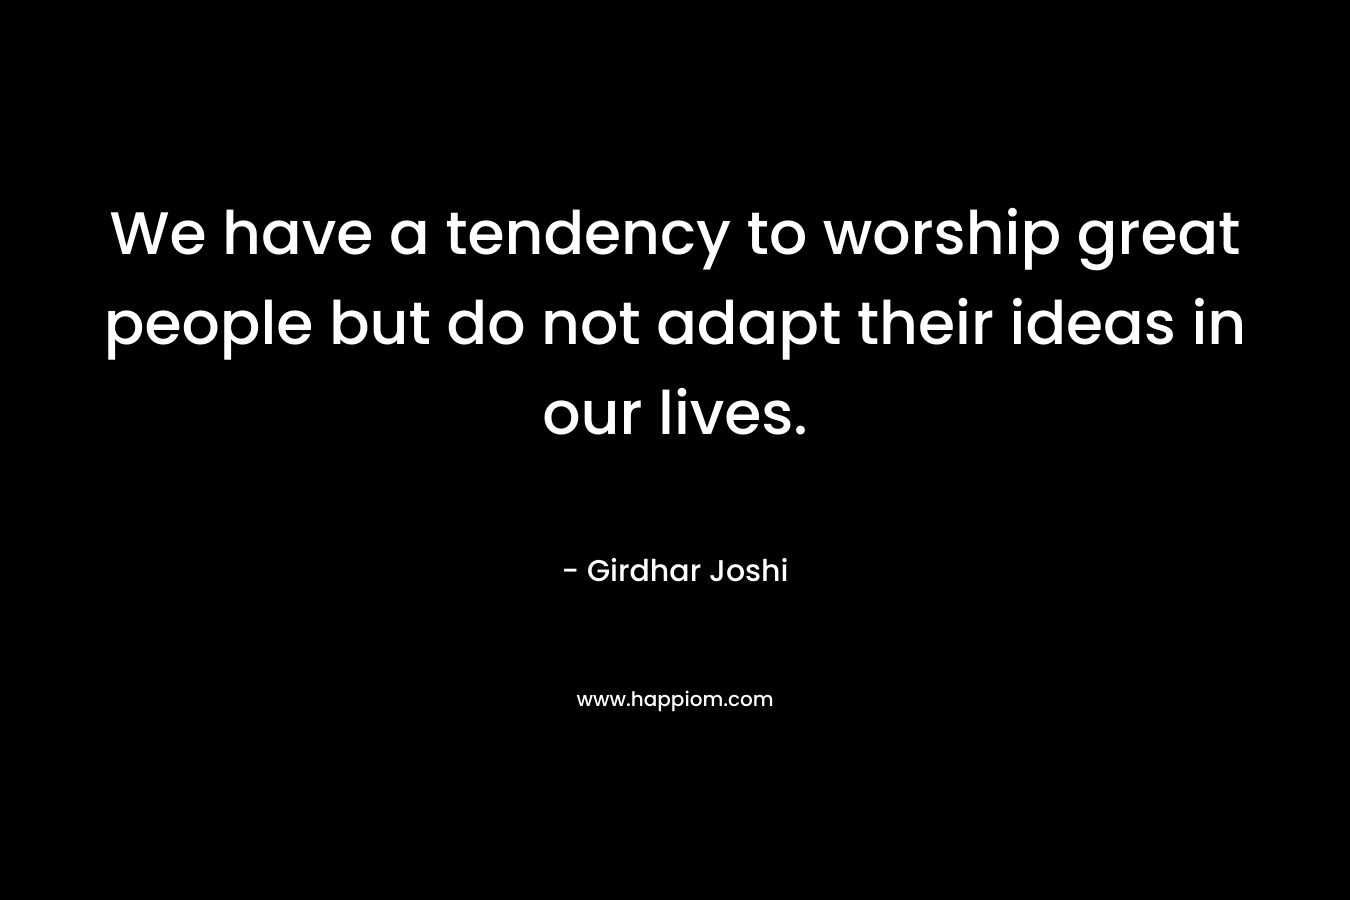 We have a tendency to worship great people but do not adapt their ideas in our lives.